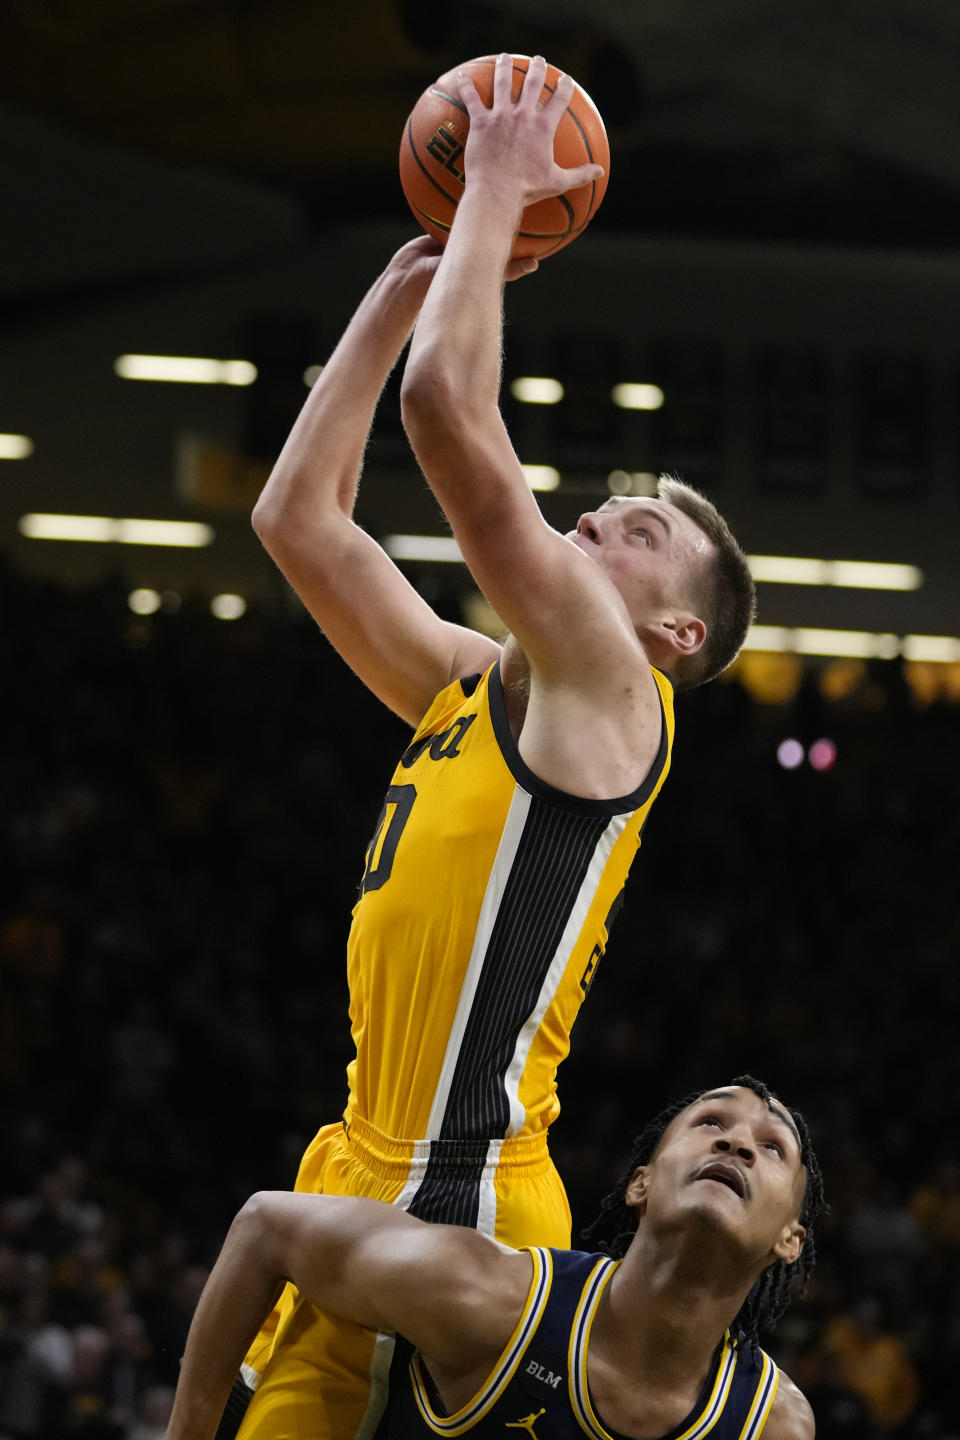 Iowa forward Payton Sandfort, top, is fouled by Michigan guard Dug McDaniel while driving to the basket during overtime in an NCAA college basketball game, Thursday, Jan. 12, 2023, in Iowa City, Iowa. Iowa won 93-84 in overtime. (AP Photo/Charlie Neibergall)